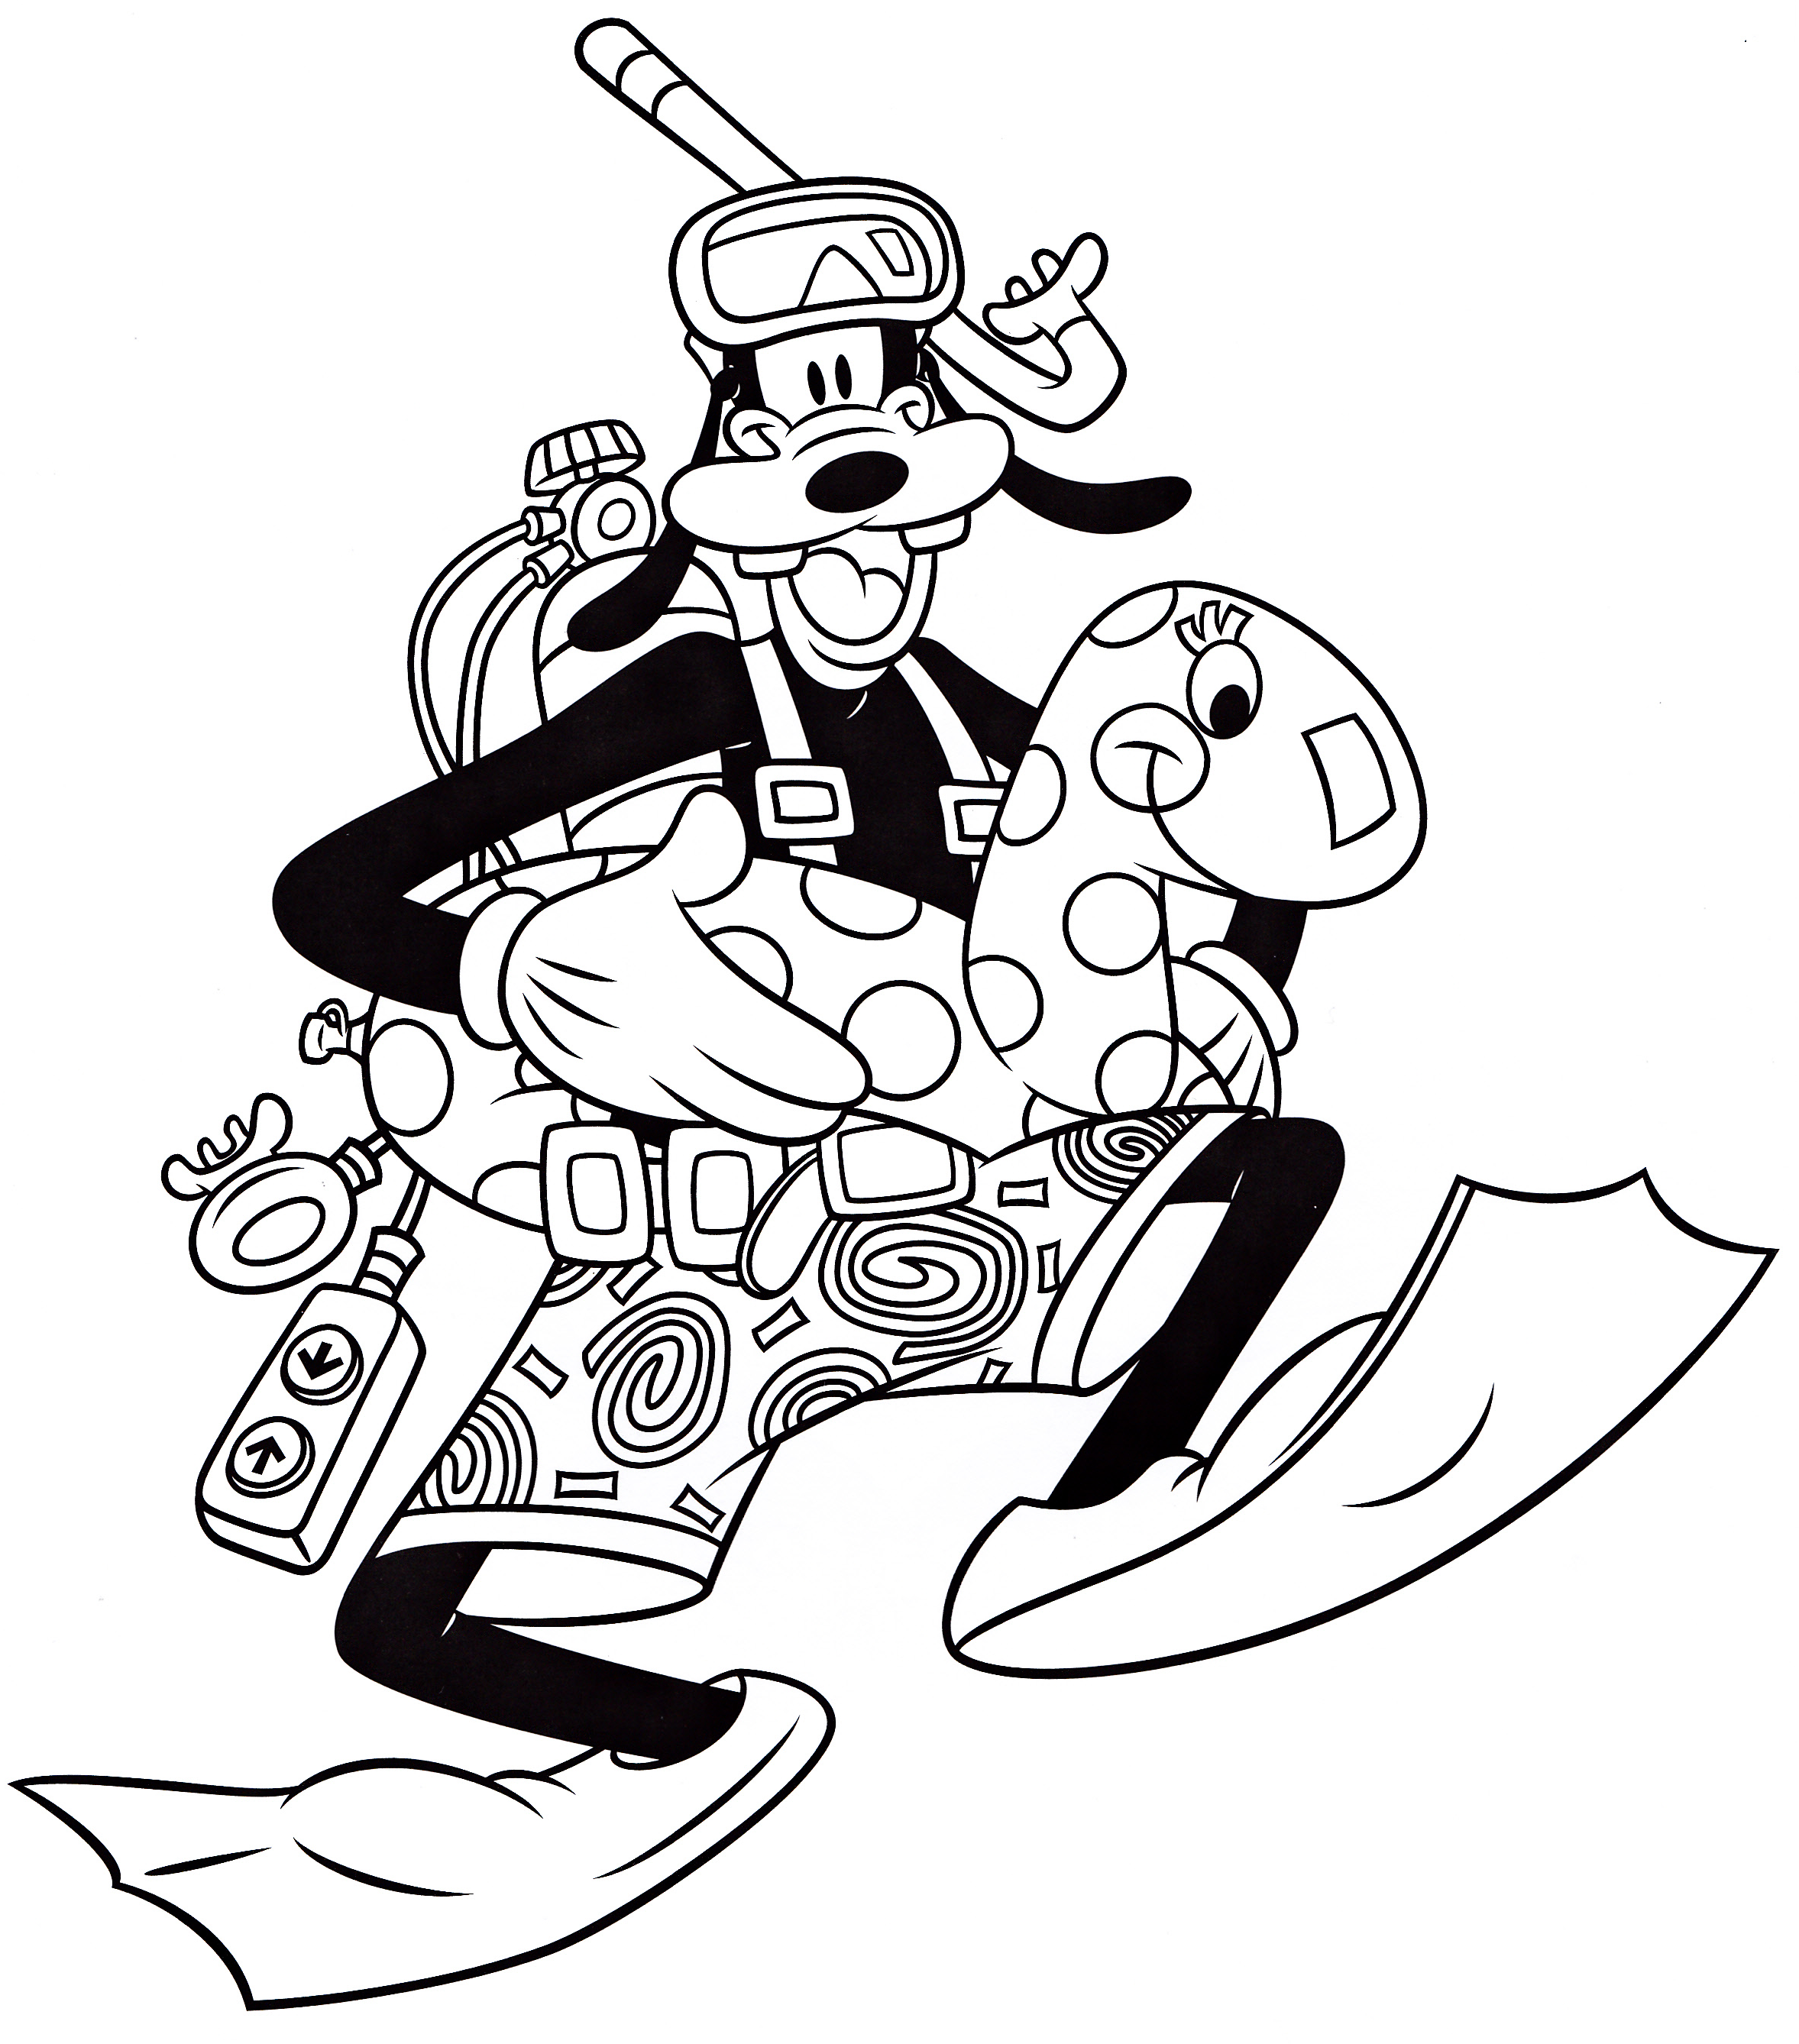 Goofy Goof Characters Coloring Page